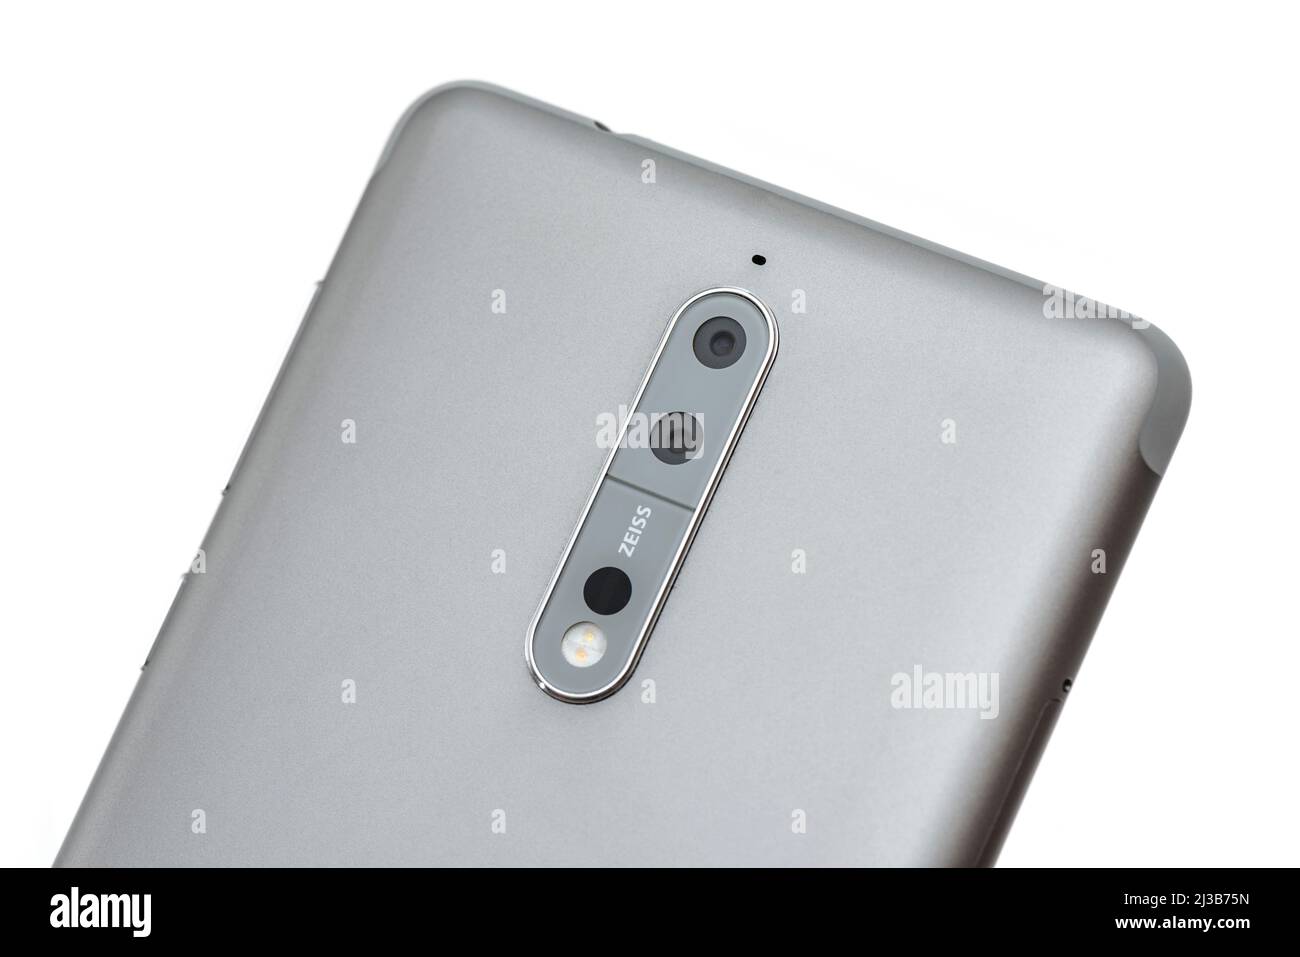 ISTANBUL, TURKEY - JUNE 10, 2019: Nokia 8 rear side. Nokia 8 android smartphone by HMD global with a notch display. Stock Photo